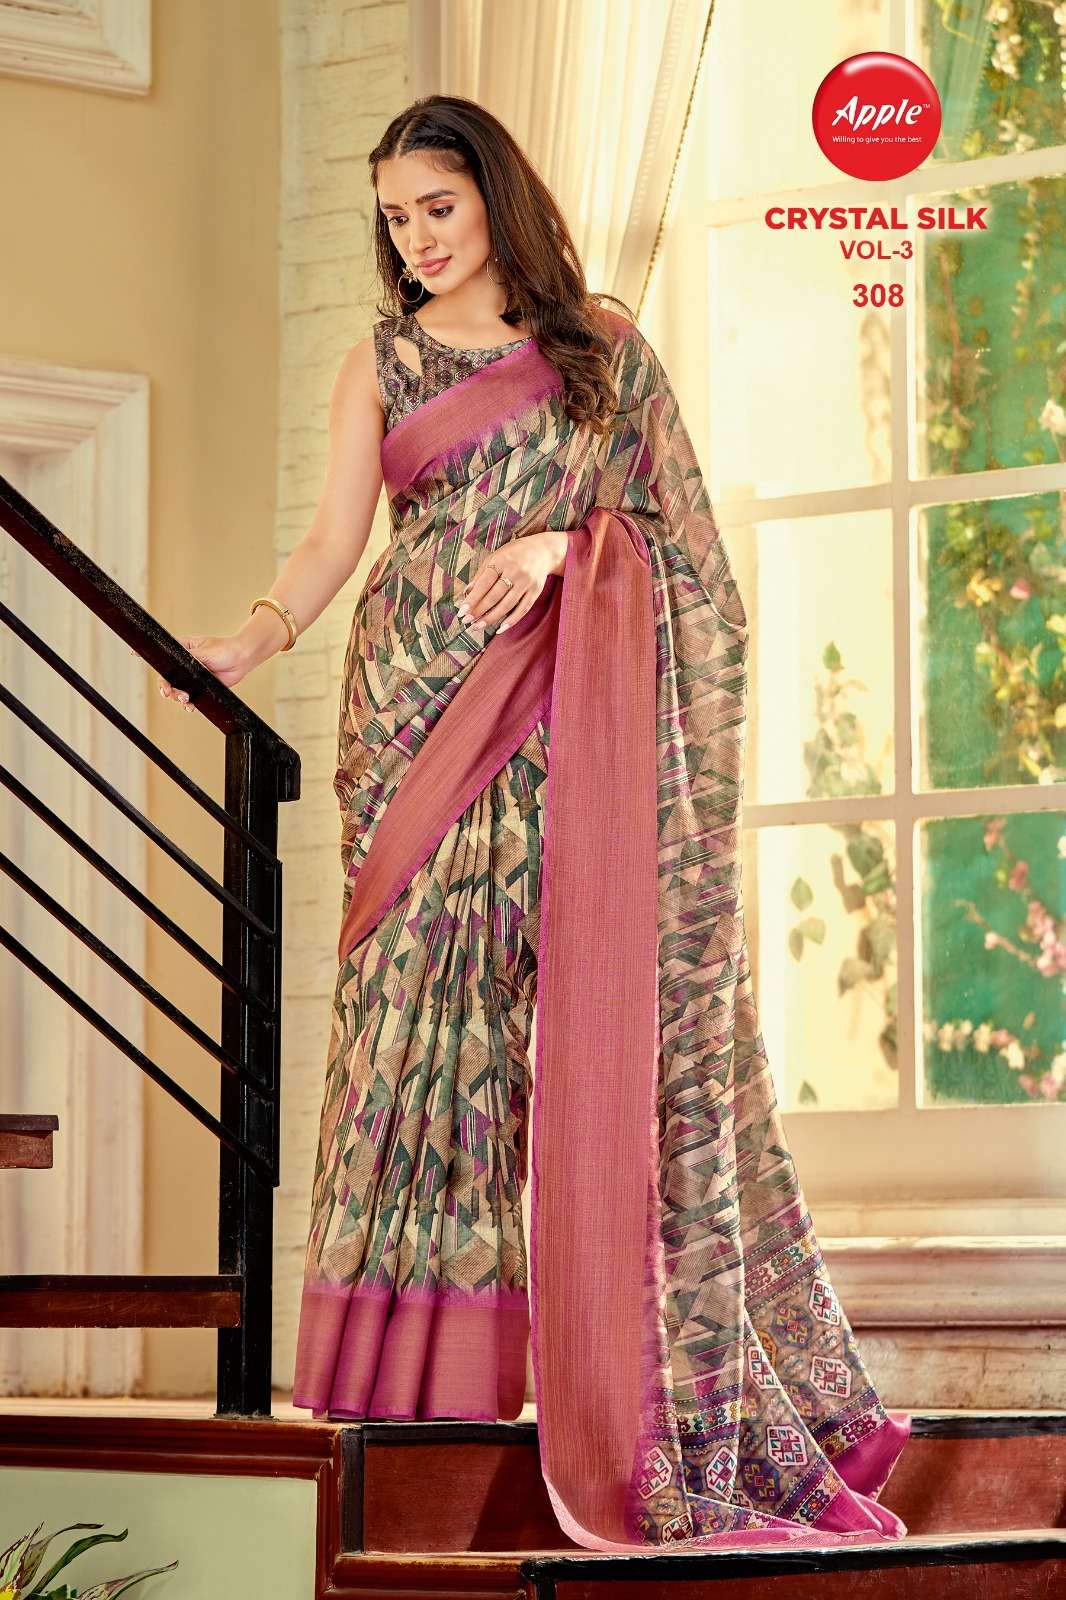 apple crystal silk vol 3 301-308 unstitched soft cotton printed sarees